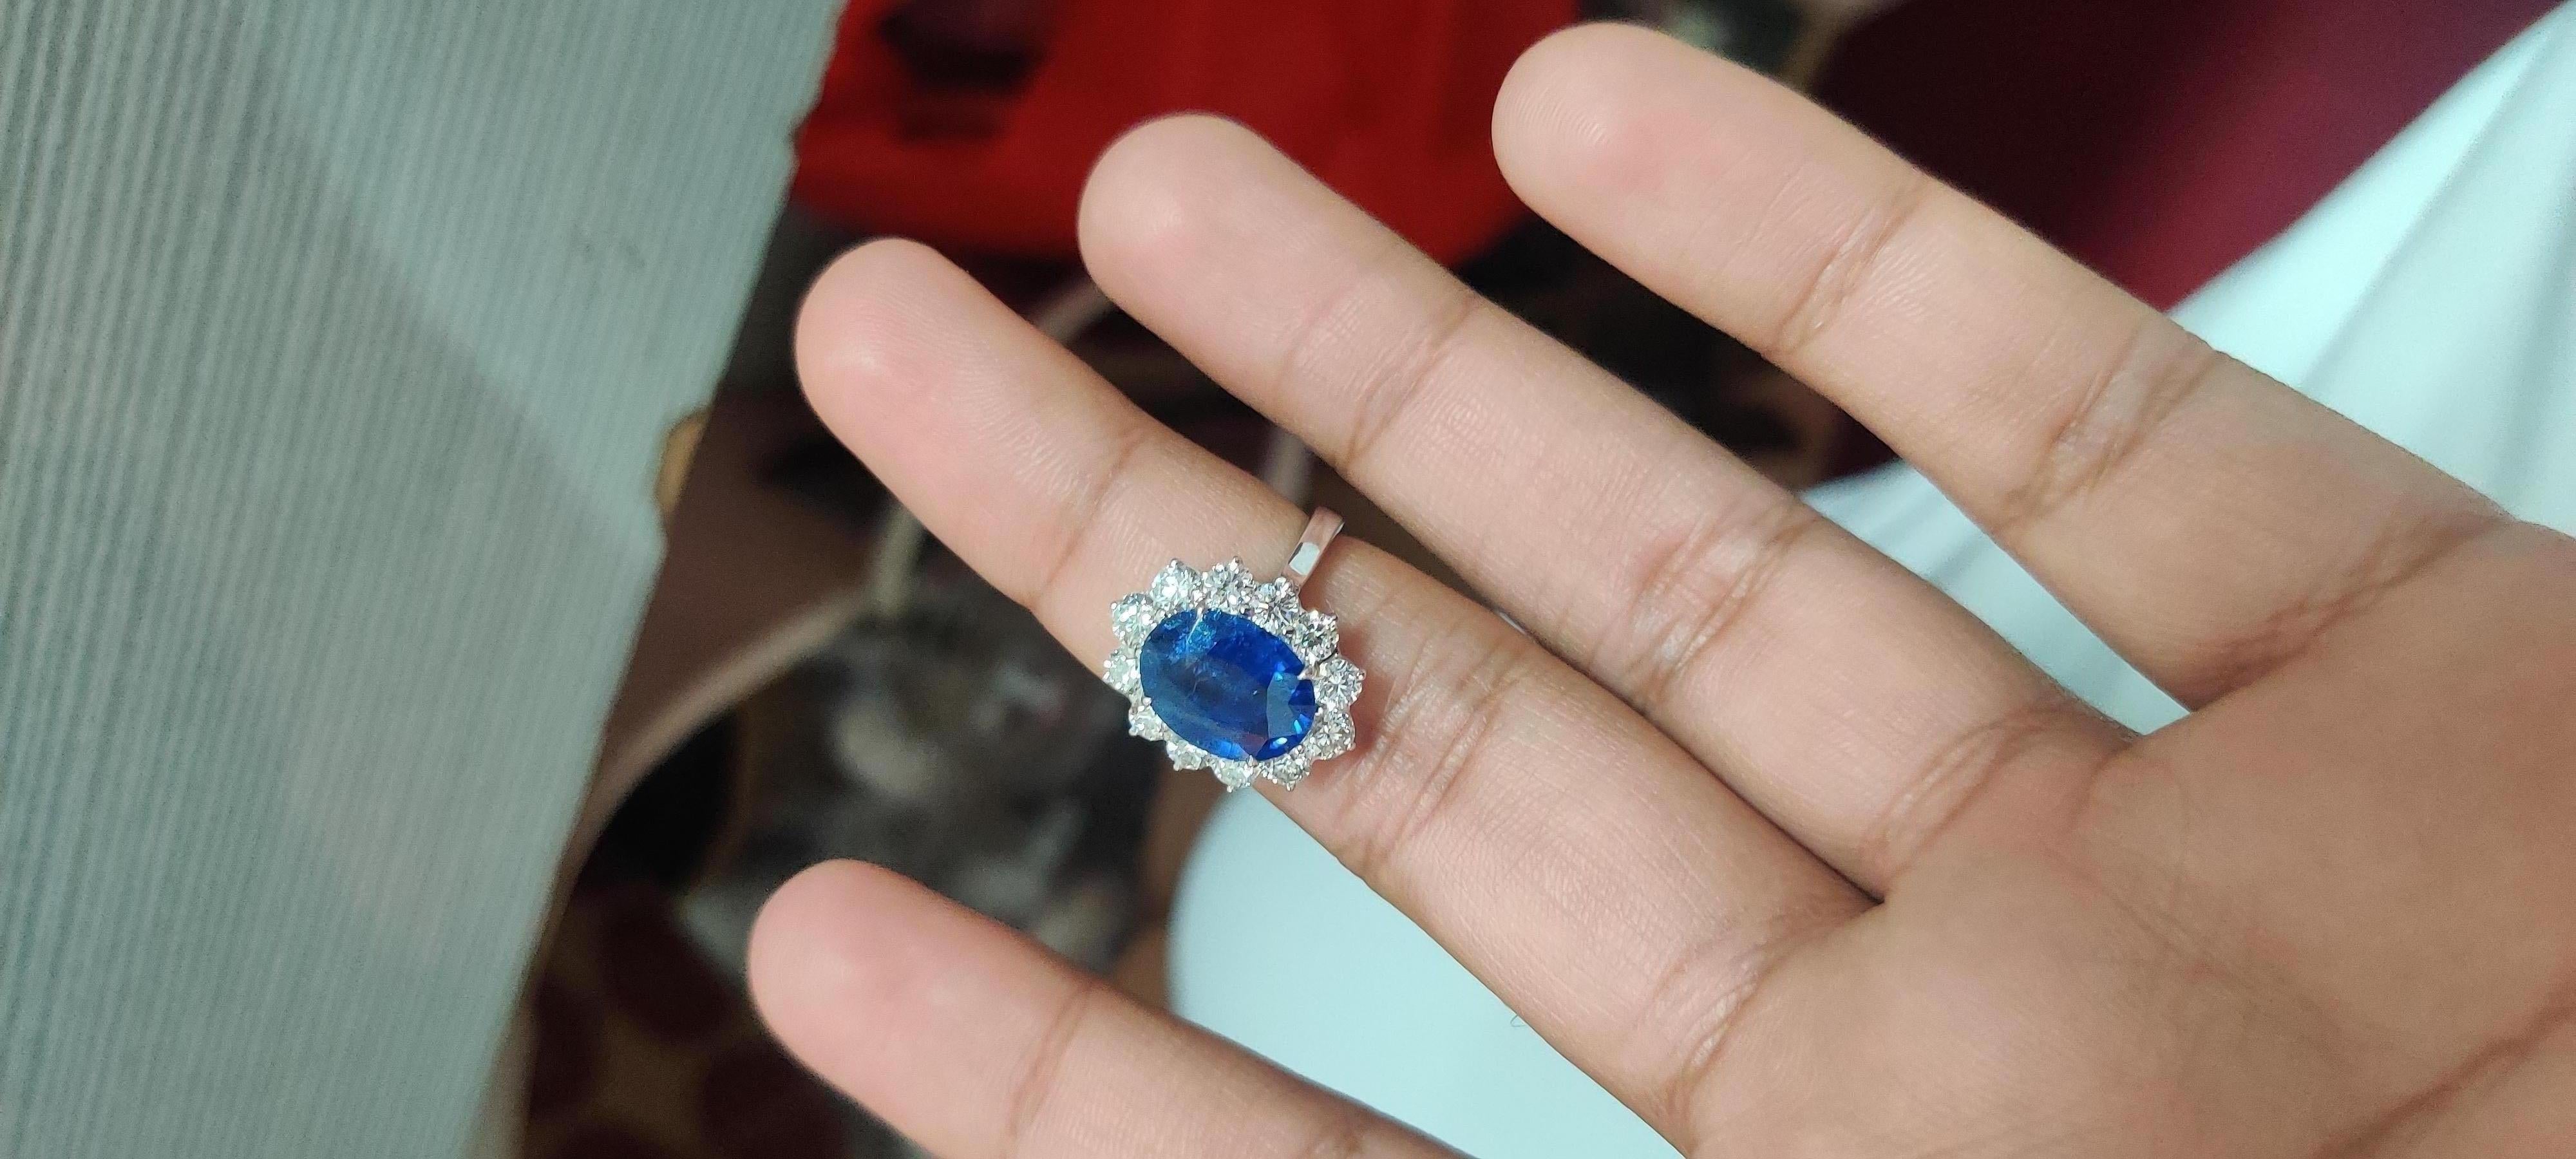 Early Victorian 4.56 Carat Natural Ceylon Blue Sapphire Diamond Ring For Sale